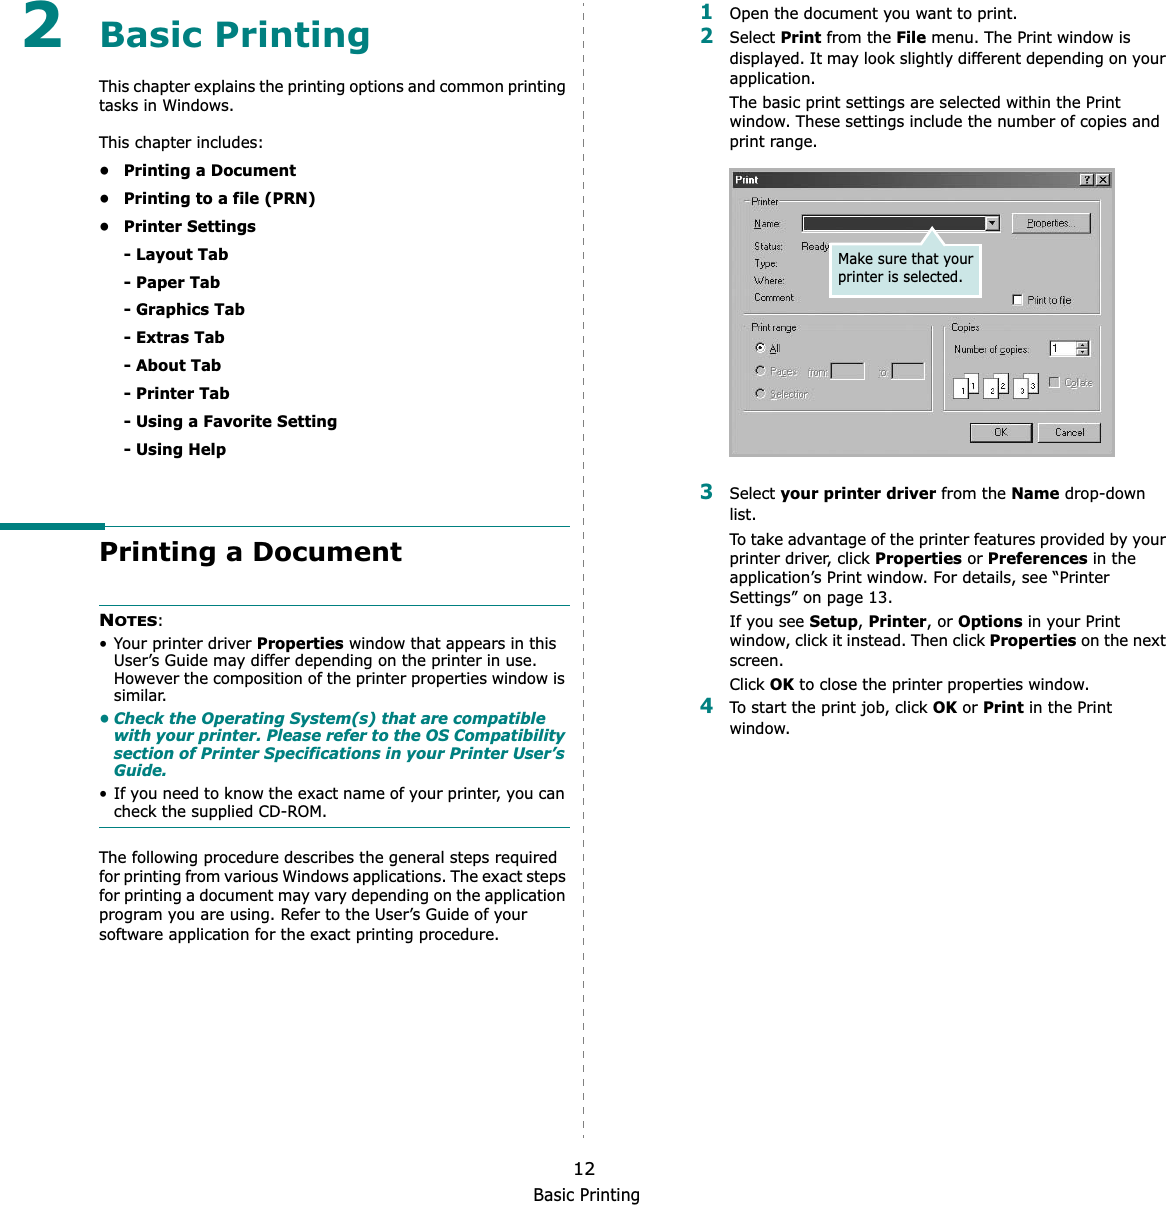 Basic Printing122Basic Printing This chapter explains the printing options and common printing tasks in Windows. This chapter includes:• Printing a Document• Printing to a file (PRN)• Printer Settings- Layout Tab- Paper Tab- Graphics Tab- Extras Tab- About Tab- Printer Tab- Using a Favorite Setting- Using HelpPrinting a DocumentNOTES:• Your printer driver Properties window that appears in this User’s Guide may differ depending on the printer in use. However the composition of the printer properties window is similar.• Check the Operating System(s) that are compatible with your printer. Please refer to the OS Compatibility section of Printer Specifications in your Printer User’s Guide.• If you need to know the exact name of your printer, you can check the supplied CD-ROM.The following procedure describes the general steps required for printing from various Windows applications. The exact steps for printing a document may vary depending on the application program you are using. Refer to the User’s Guide of your software application for the exact printing procedure.1Open the document you want to print.2Select Print from the File menu. The Print window is displayed. It may look slightly different depending on your application. The basic print settings are selected within the Print window. These settings include the number of copies and print range.3Select your printer driver from the Name drop-down list.To take advantage of the printer features provided by your printer driver, click Properties or Preferences in the application’s Print window. For details, see “Printer Settings” on page 13.If you see Setup,Printer, or Options in your Print window, click it instead. Then click Properties on the next screen.Click OK to close the printer properties window.4To start the print job, click OK or Print in the Print window.Make sure that your printer is selected.